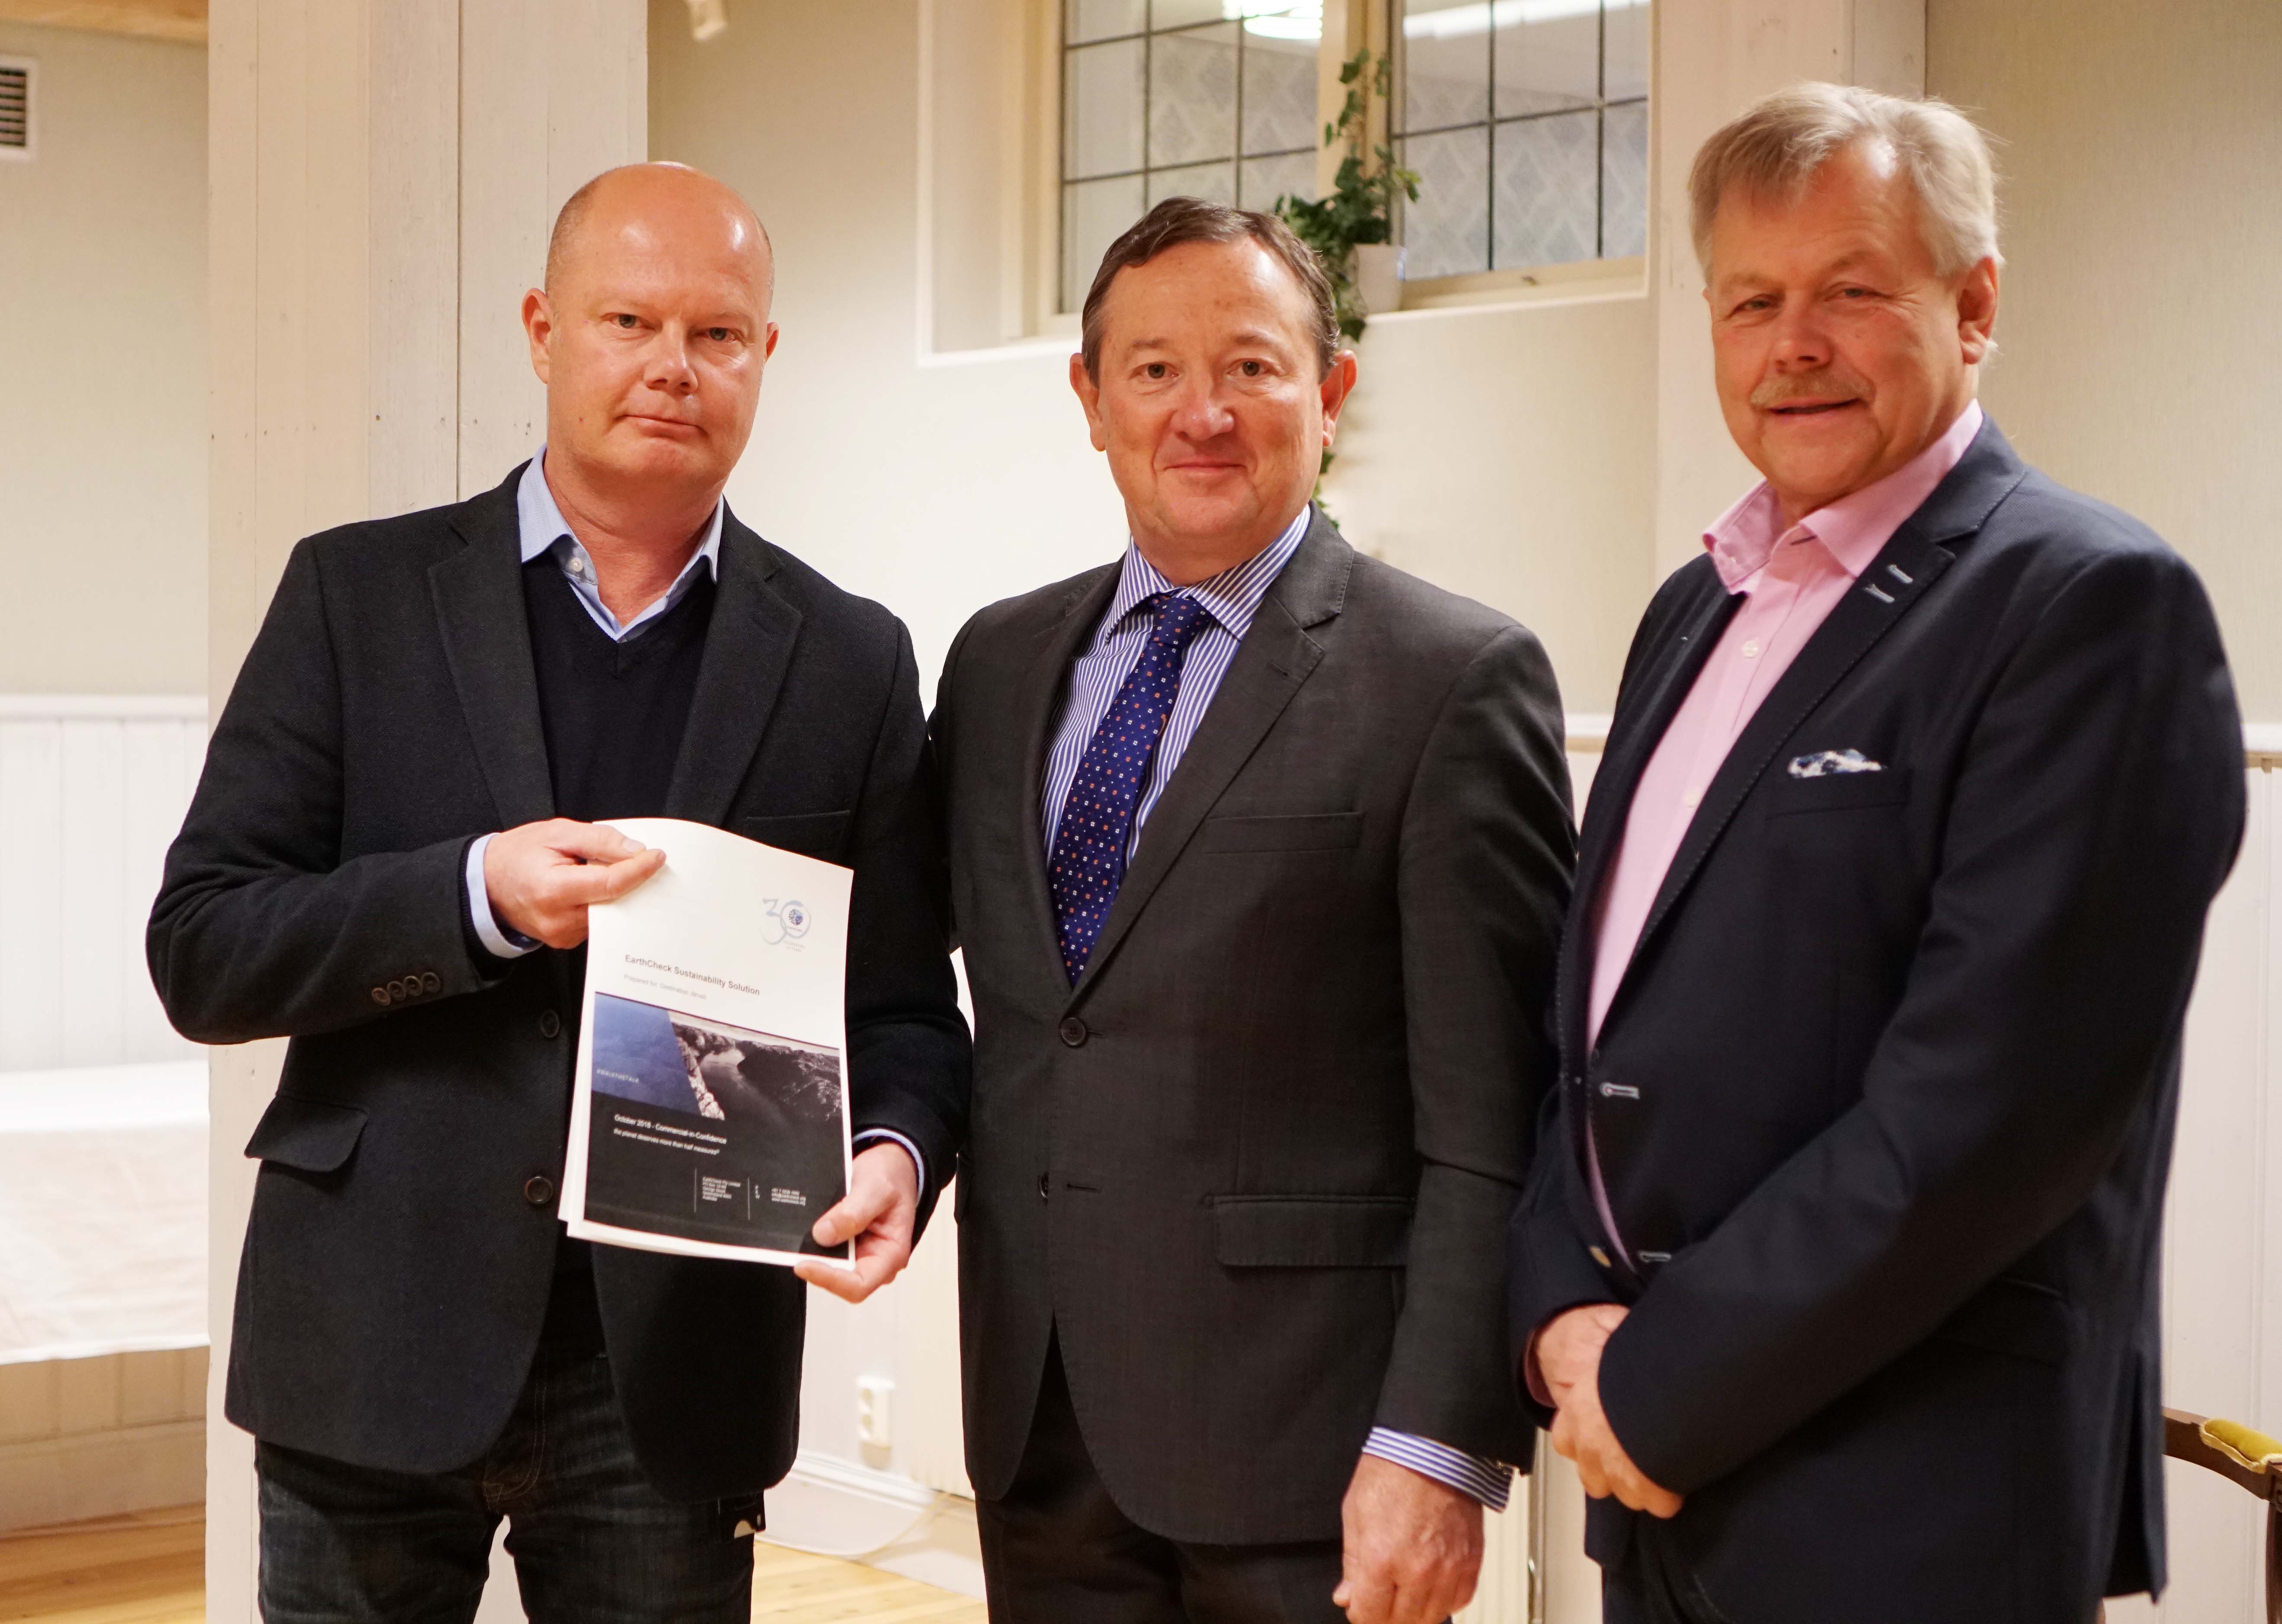 The agreement was signed on Thursday 15 November by municipality director Nicklas Bremefors, EarthCheck CEO Stewart Moore and municipality board chairman Sören Görgård.